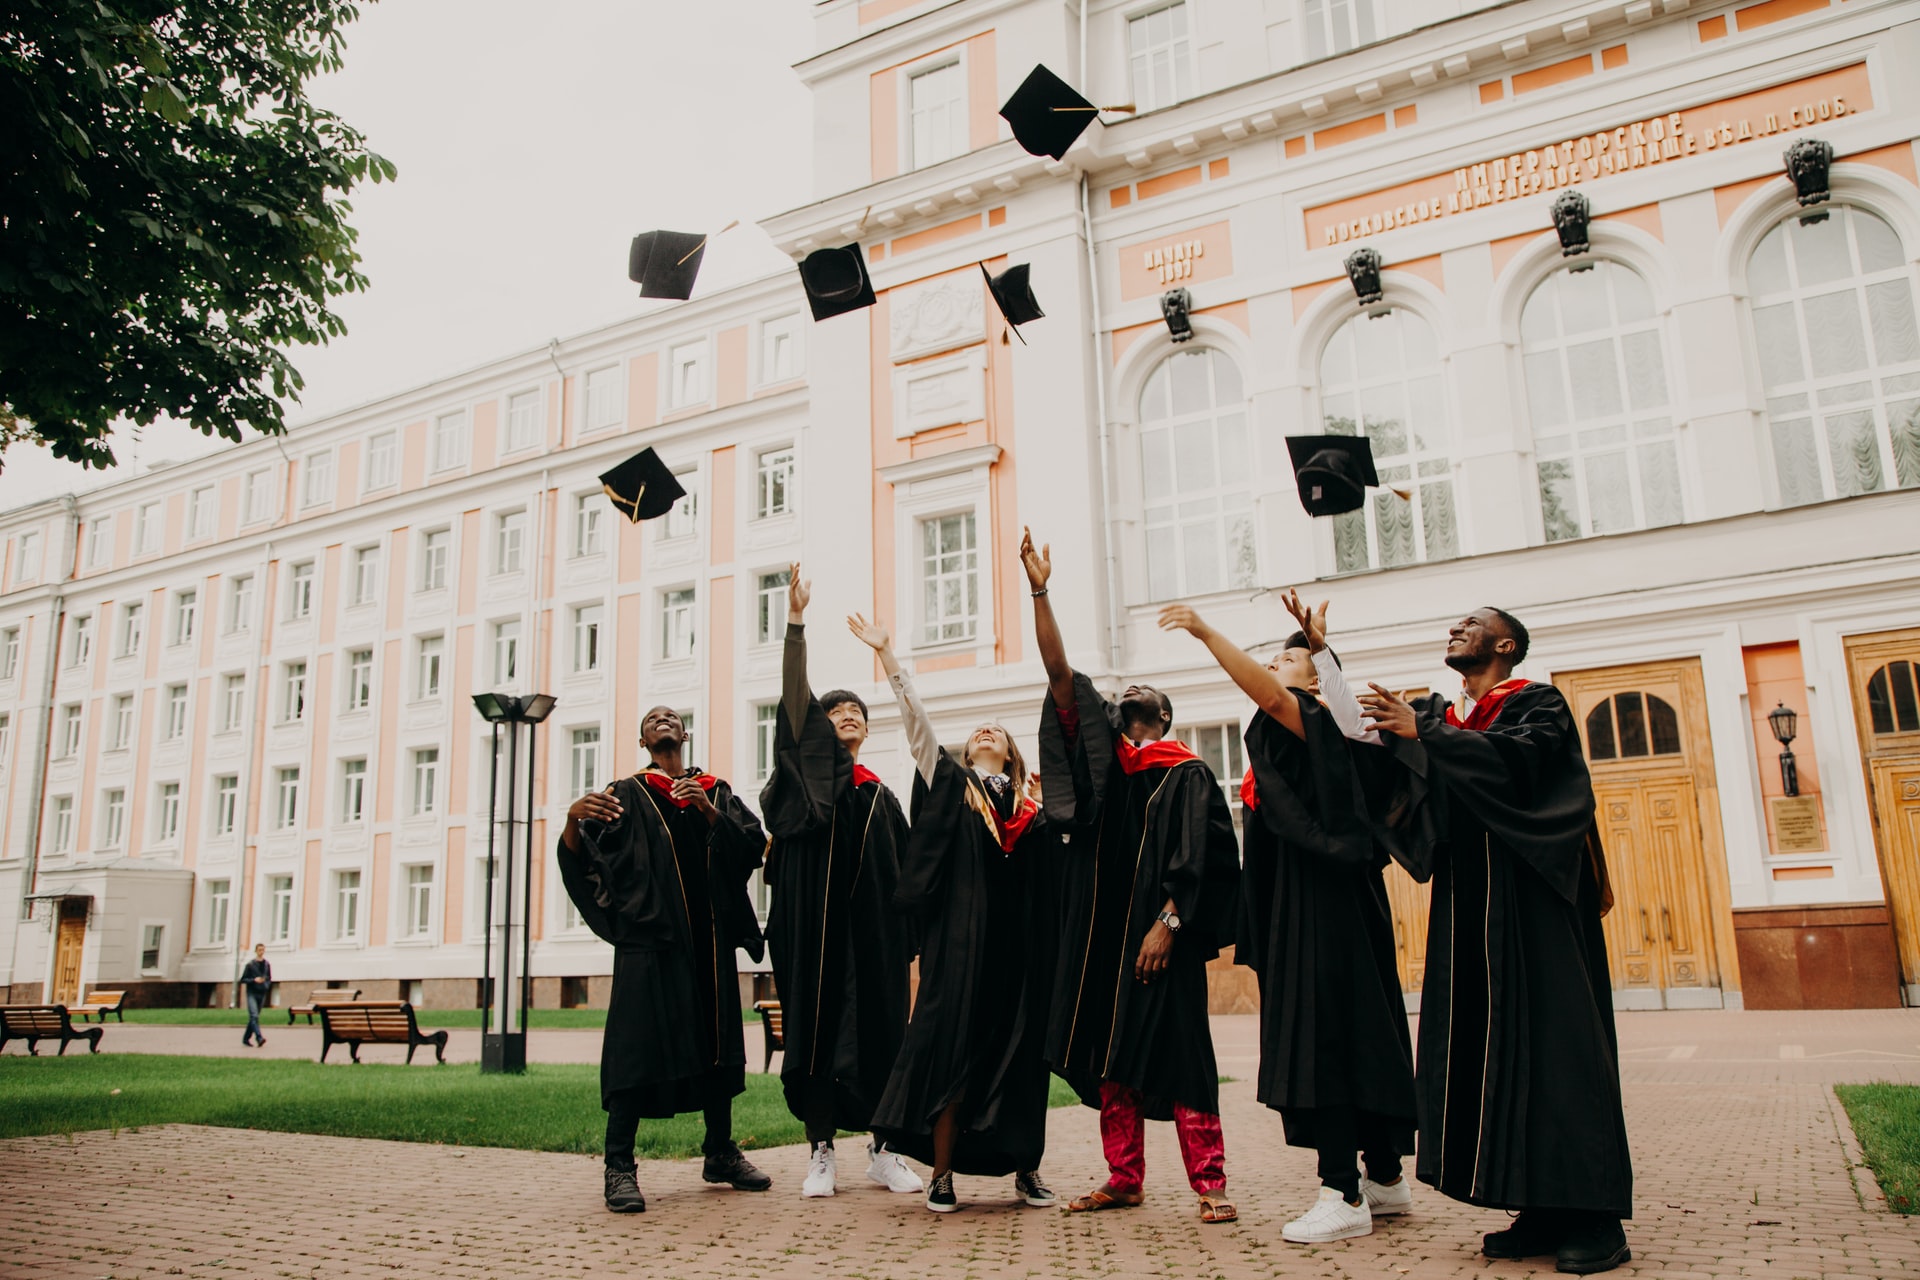 A group of graduates tosses their caps in the air in front of an academic building